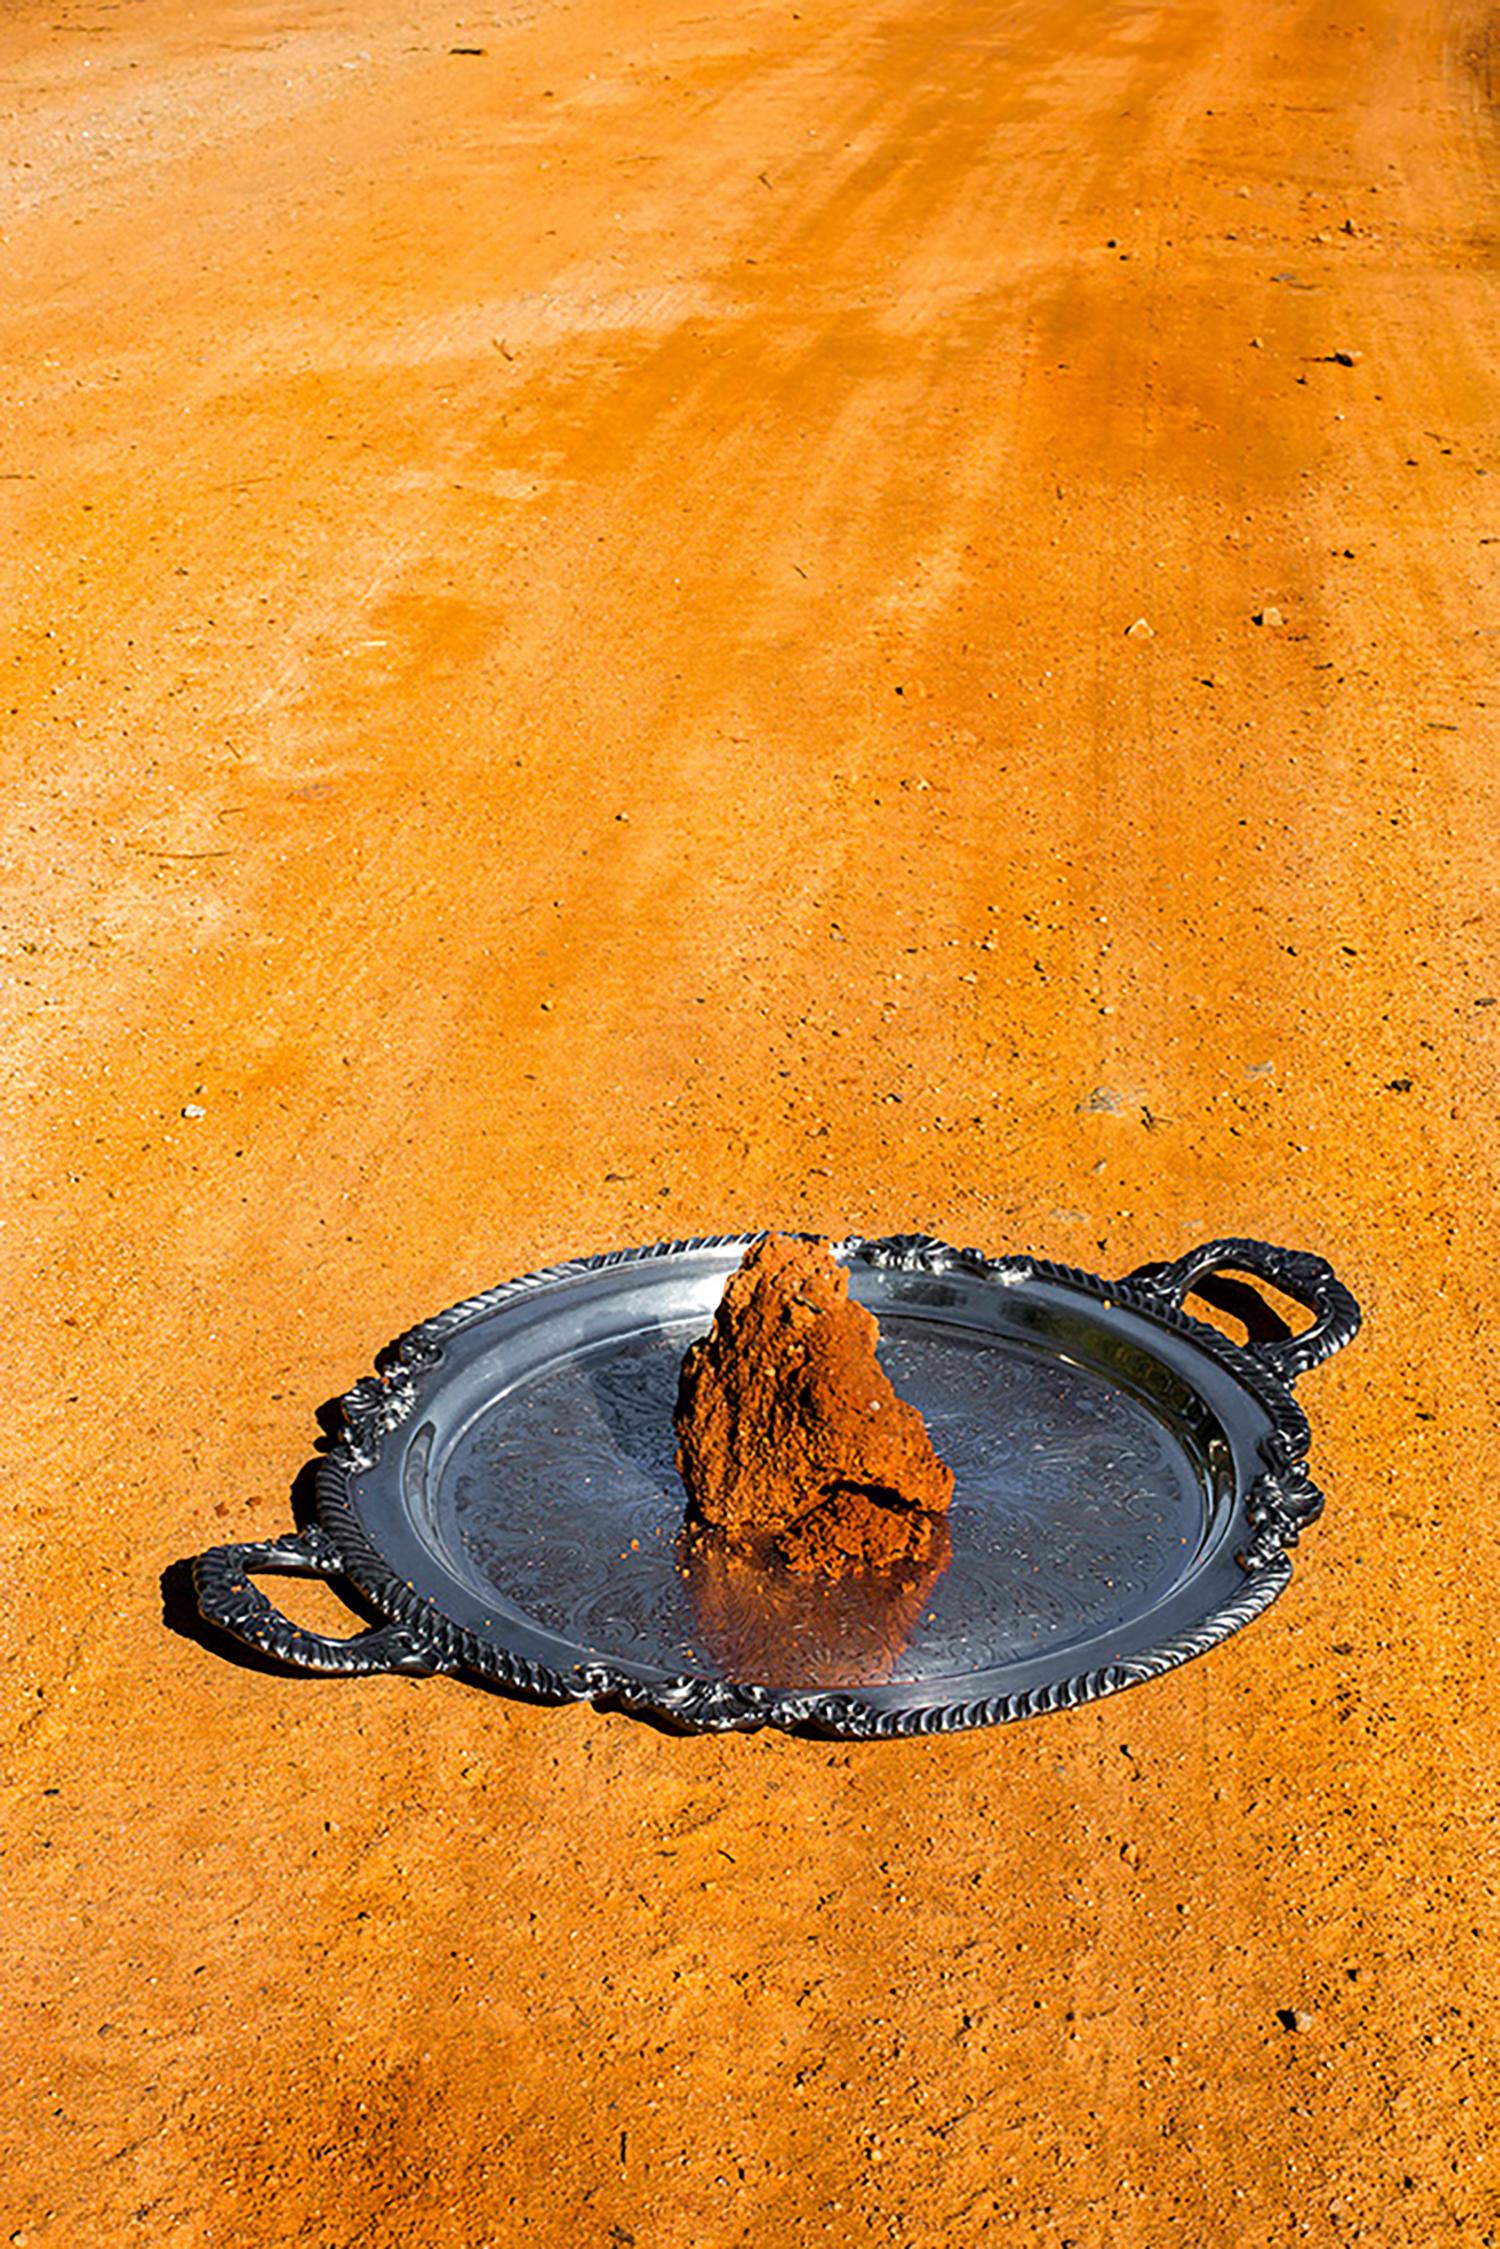 "Kin" - Southern, red clay, landscape, silver platter, still life photography